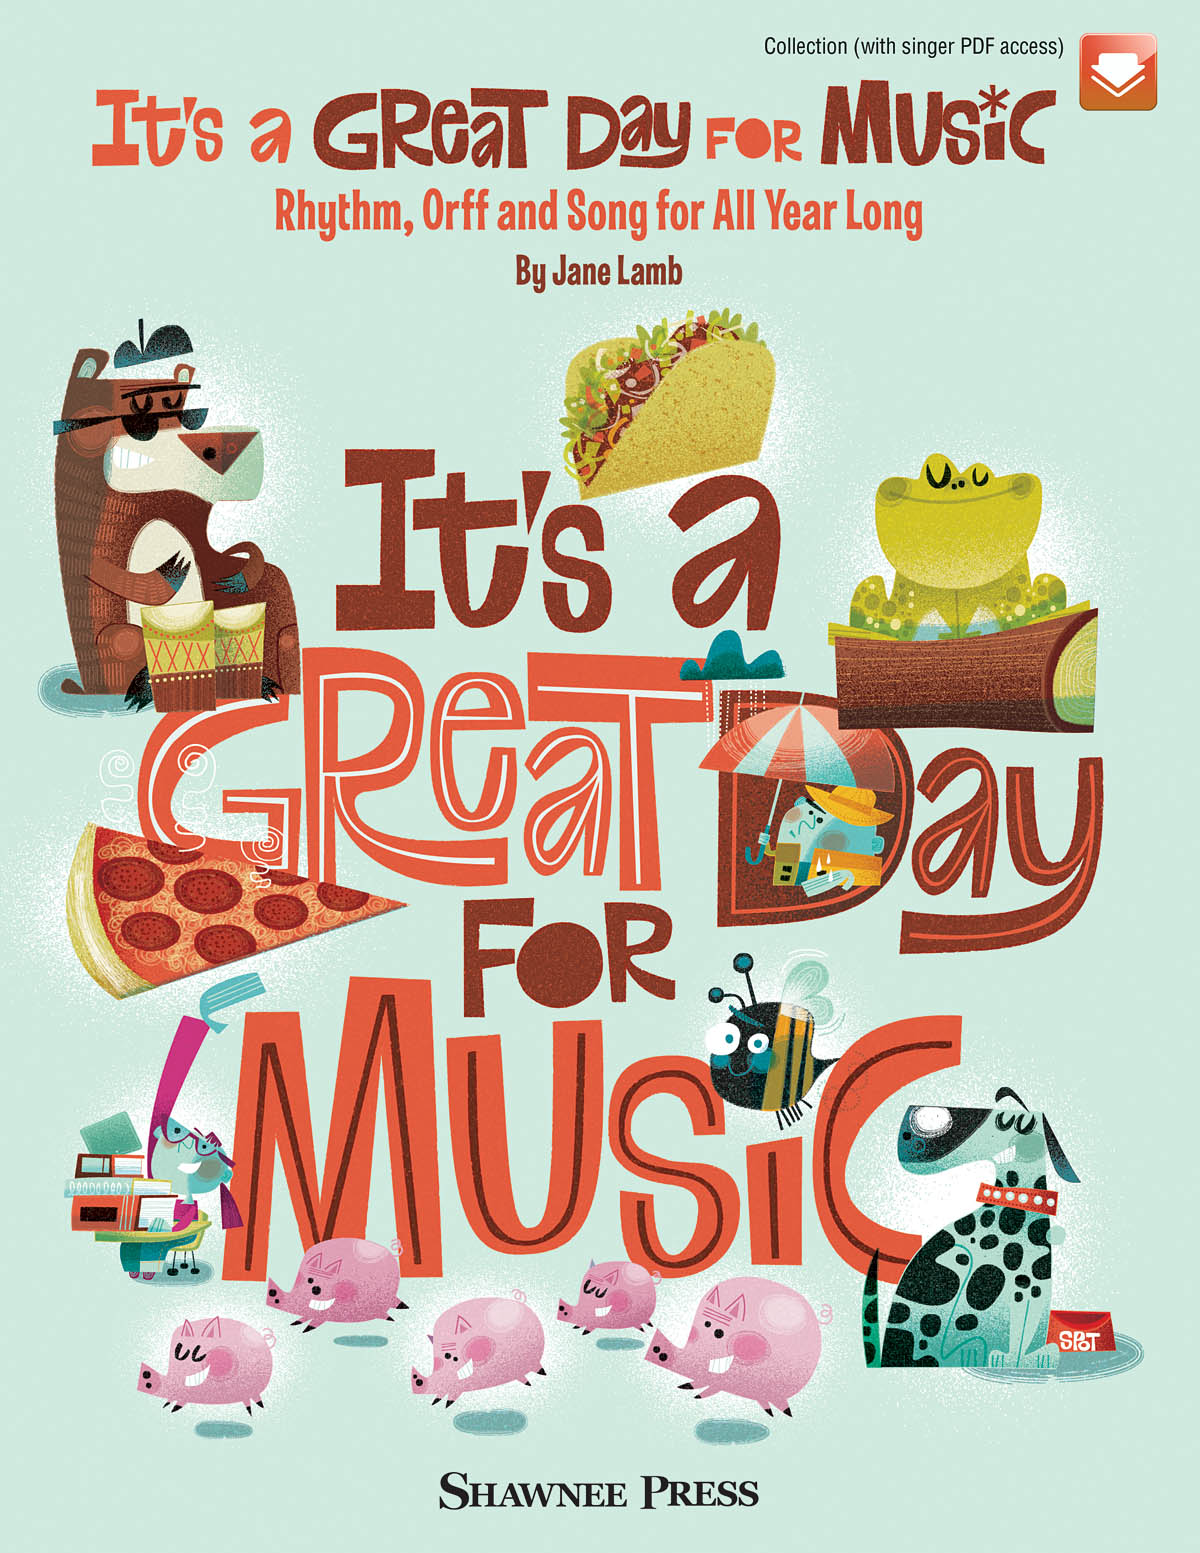 It's a Great Day for Music - Rhythm, Orff and Song for All Year Long, Collection (with singer PDF access) - pro sbor